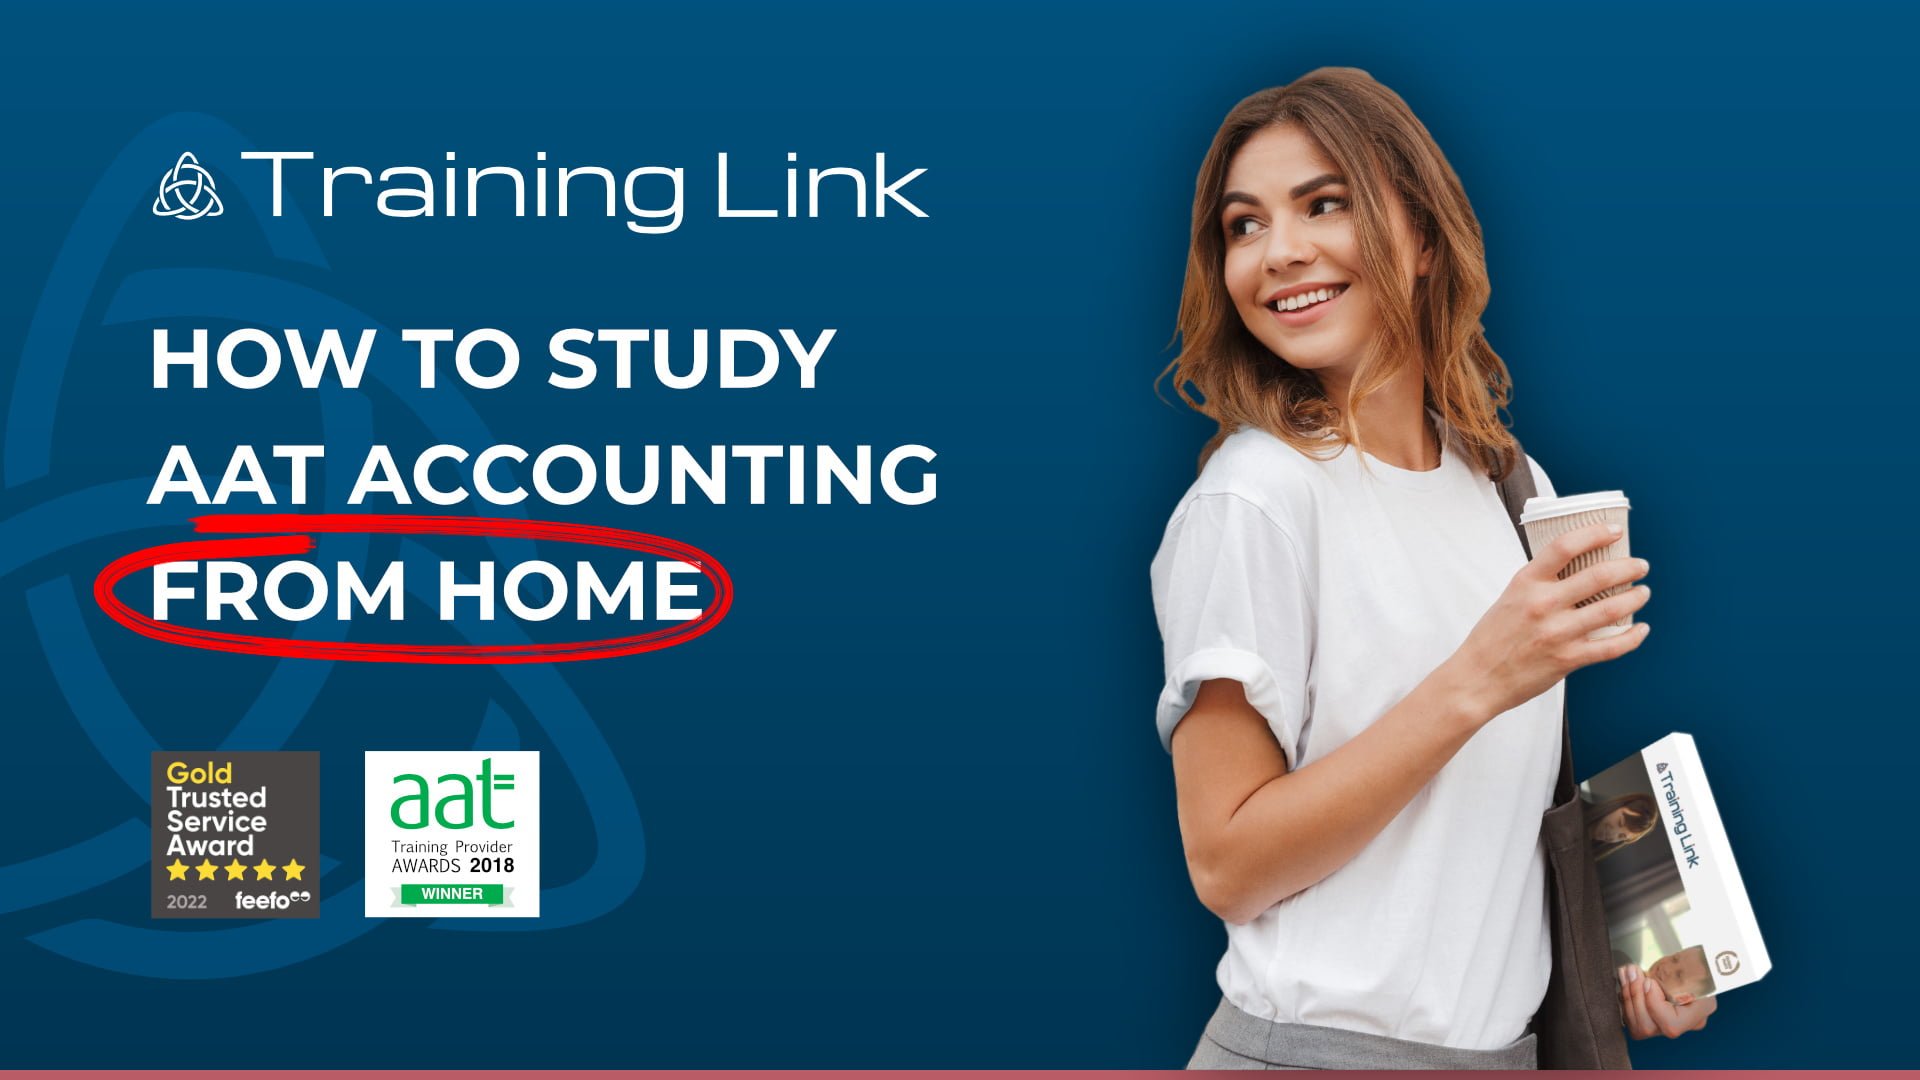 How to study AAT Accounting from home (webinar)